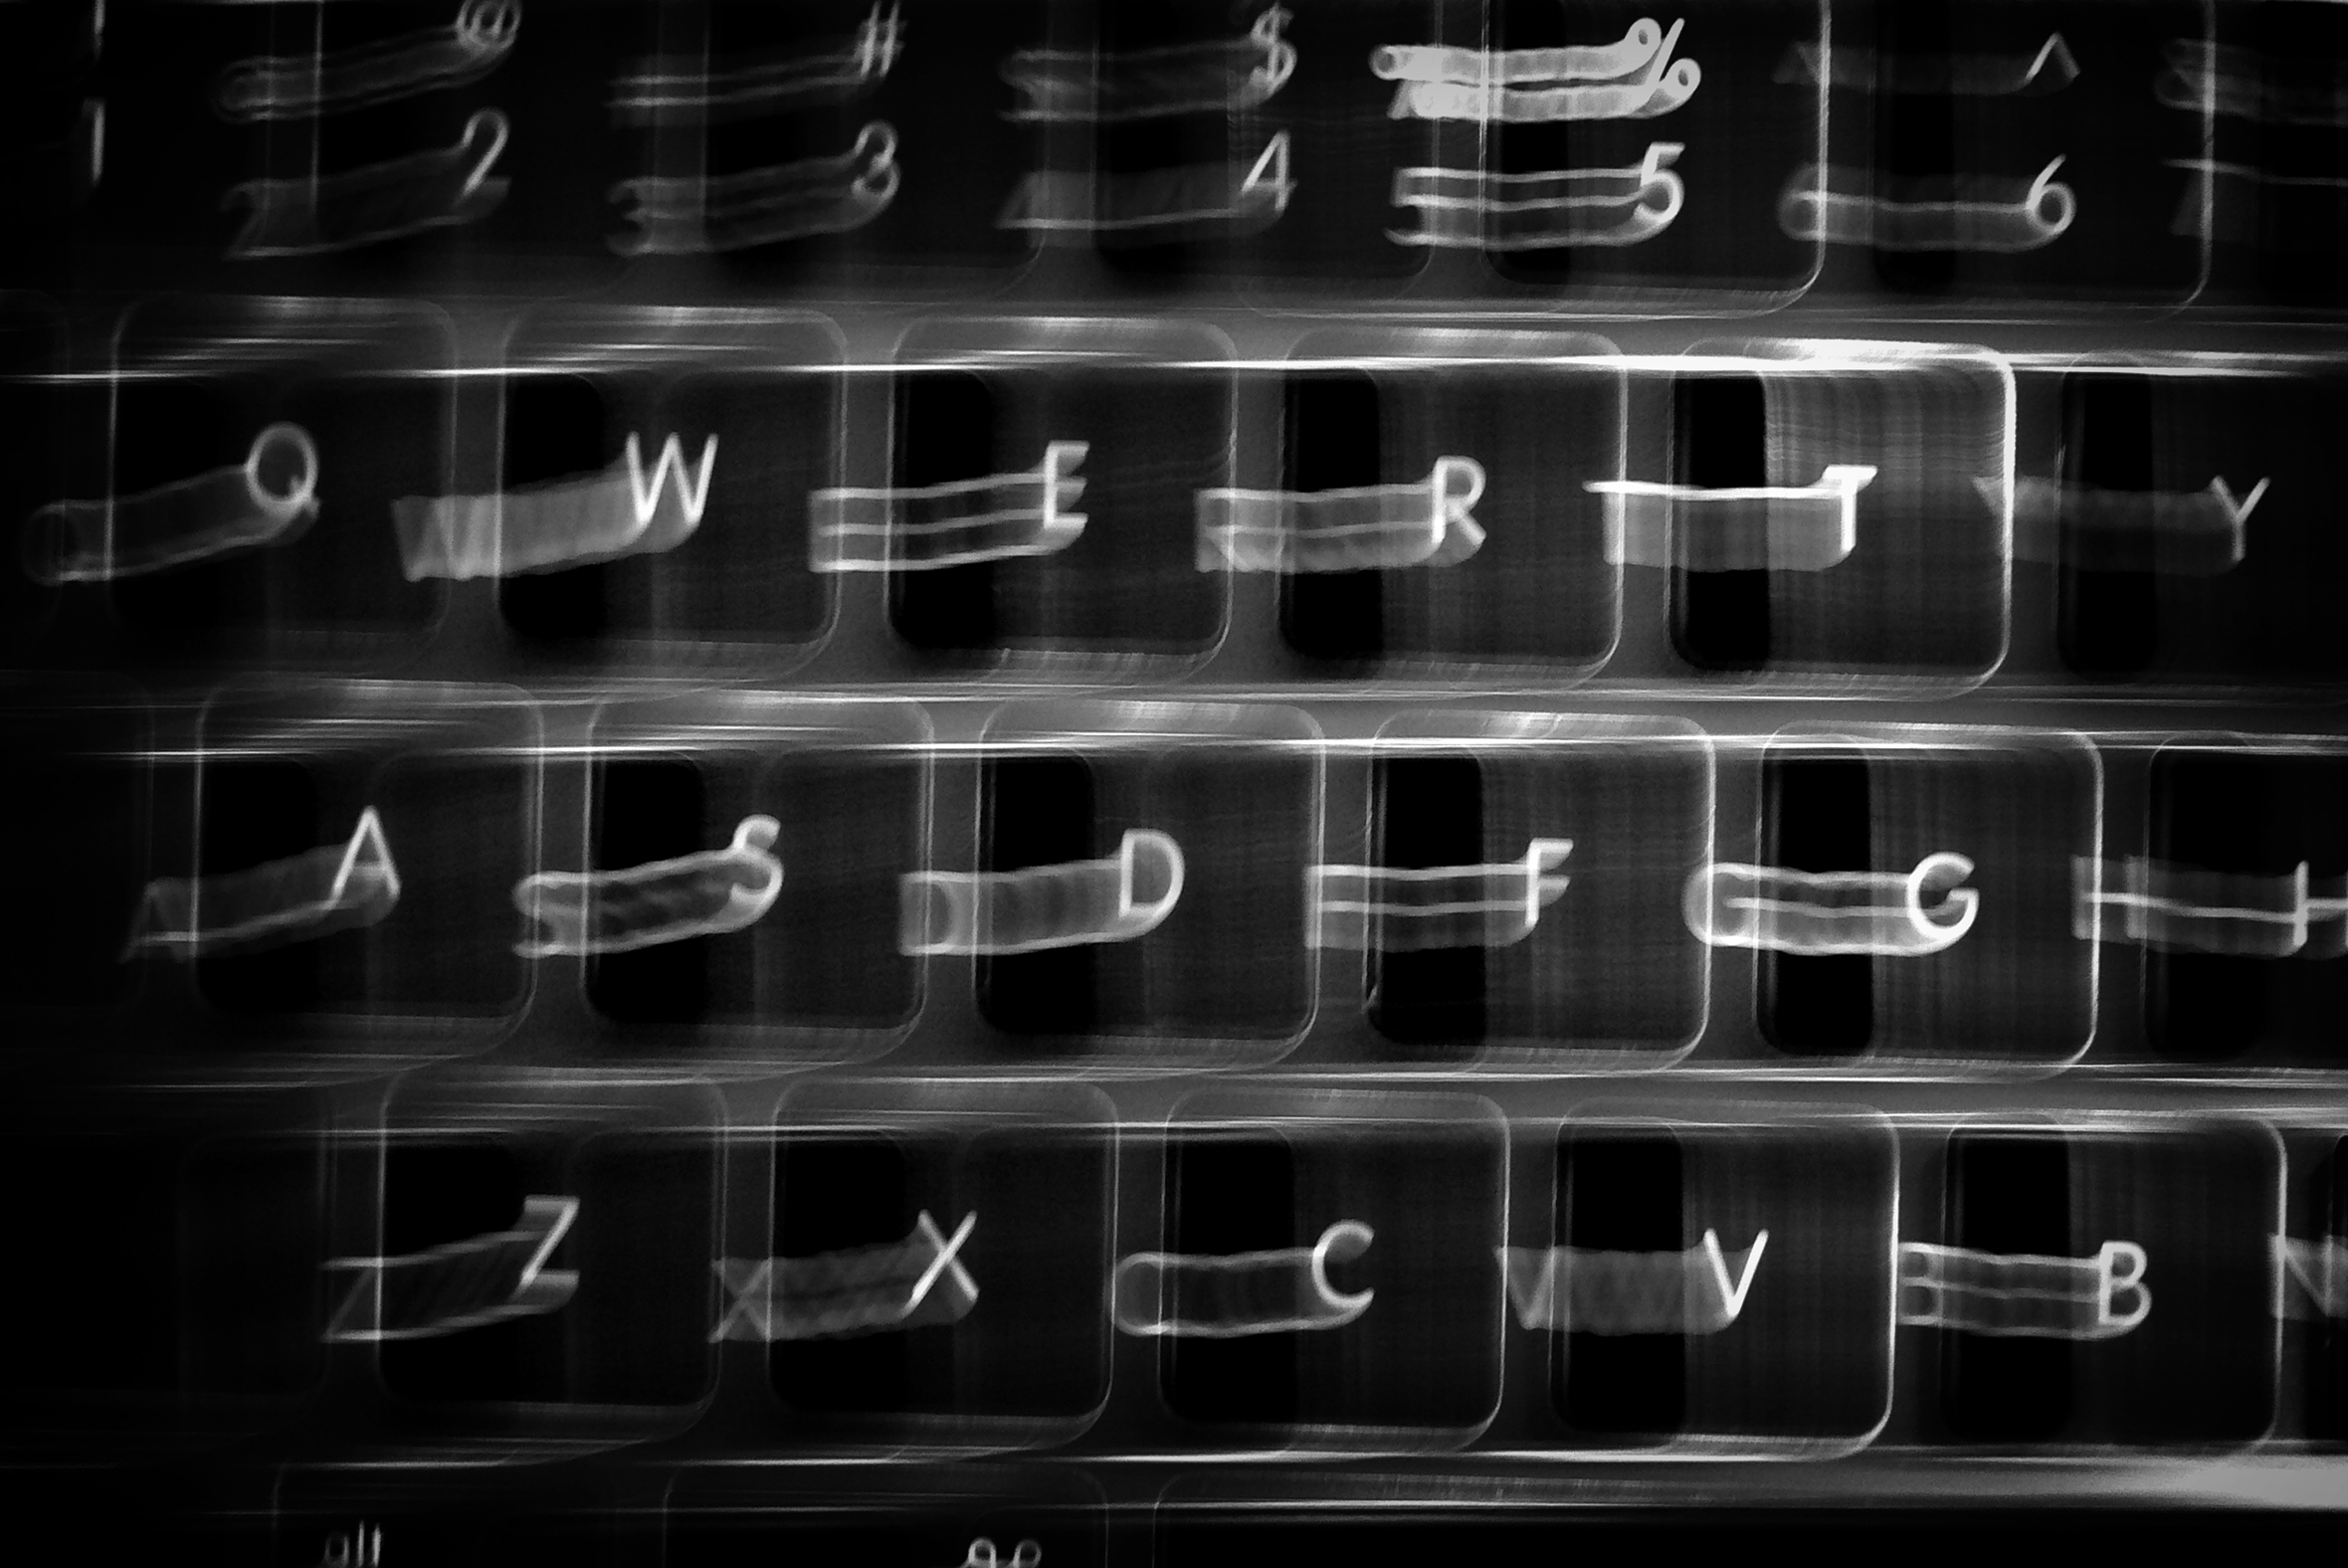 Close-up and motion-blurred image of a computer keyboard.